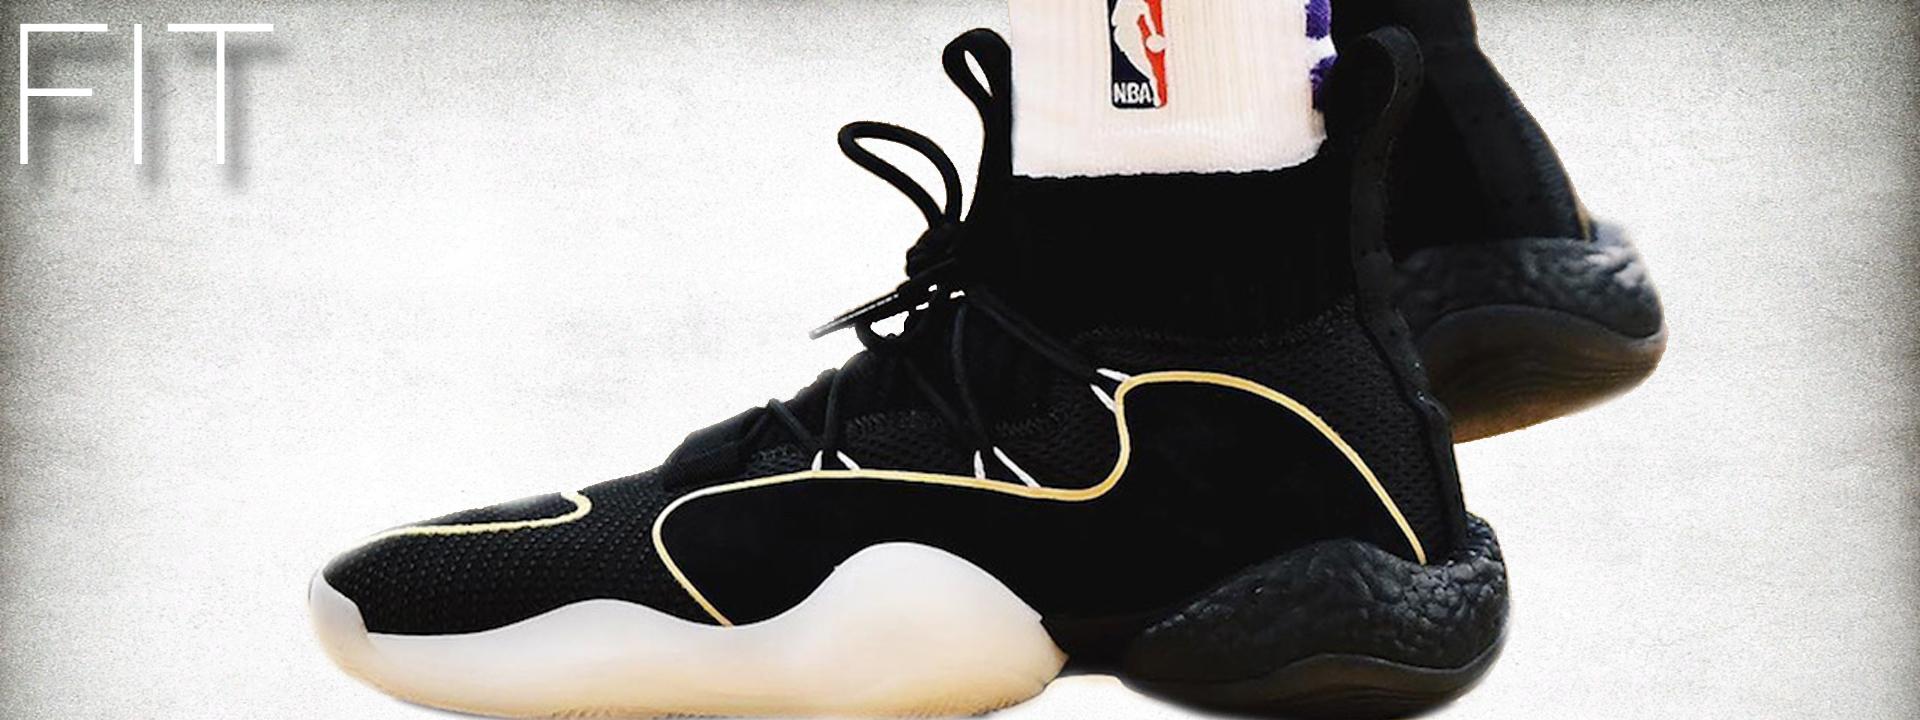 adidas Crazy BYW X performance review fit